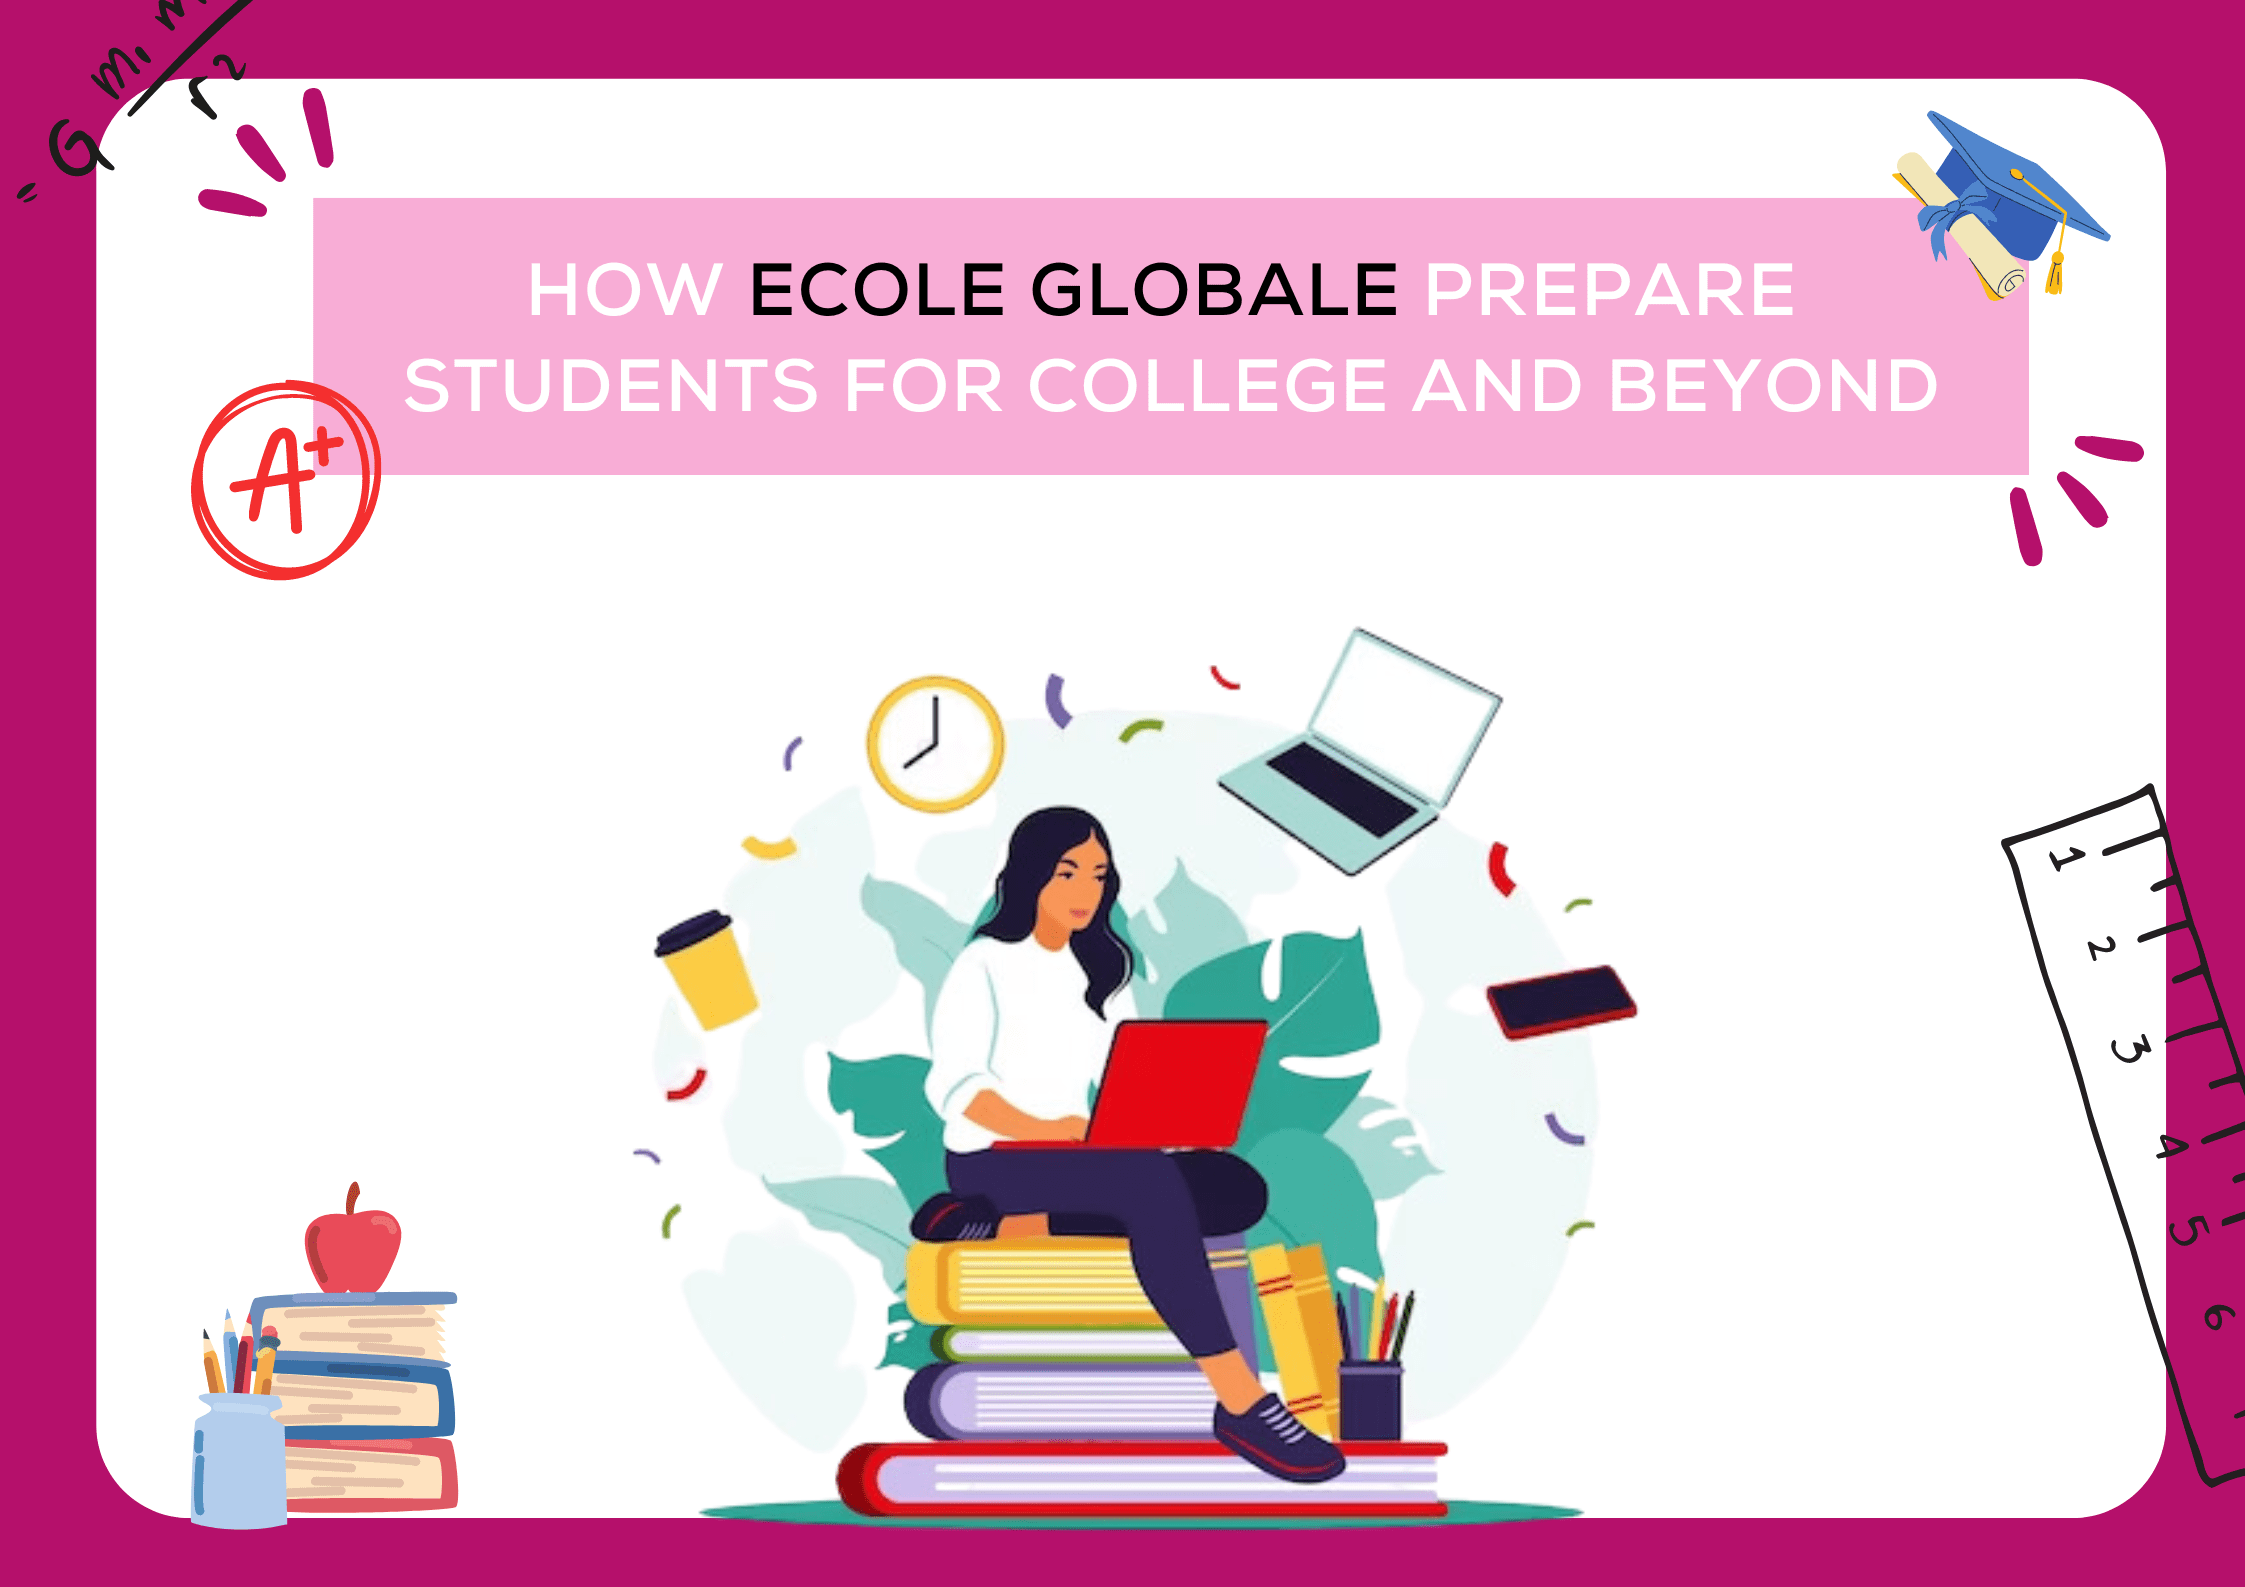 You are currently viewing How Ecole Globale prepare students for college and beyond